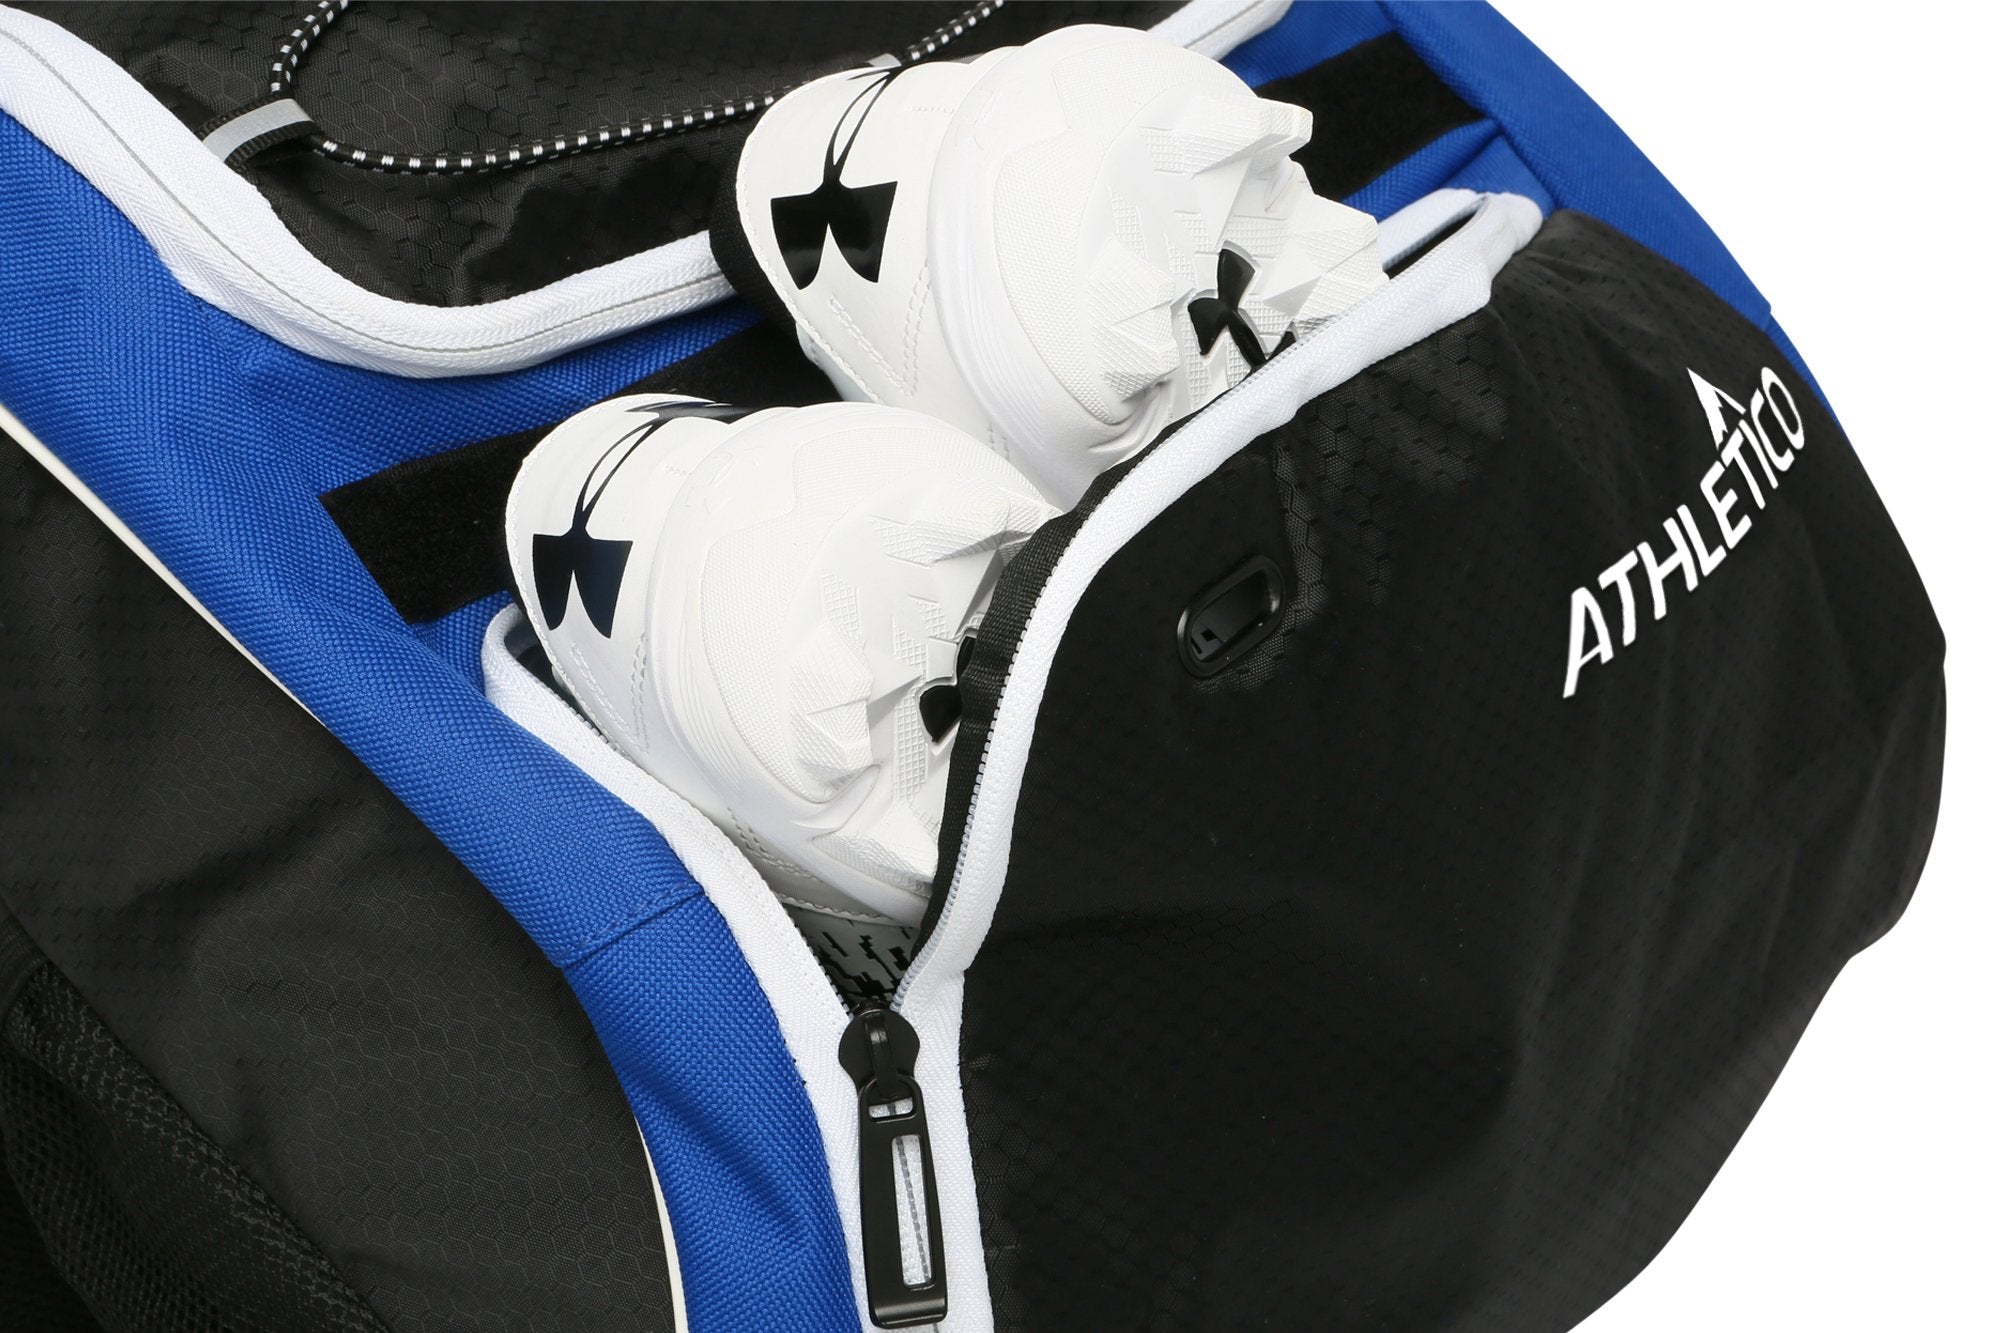 Athletico Baseball Bat Bag - Backpack for Baseball, T-Ball & Softball Equipment & Gear for Youth and Adults | Holds Bat, Helmet, Glove, & Shoes | Separate Shoe Compartment & Fence Hook (Blue)  - Good